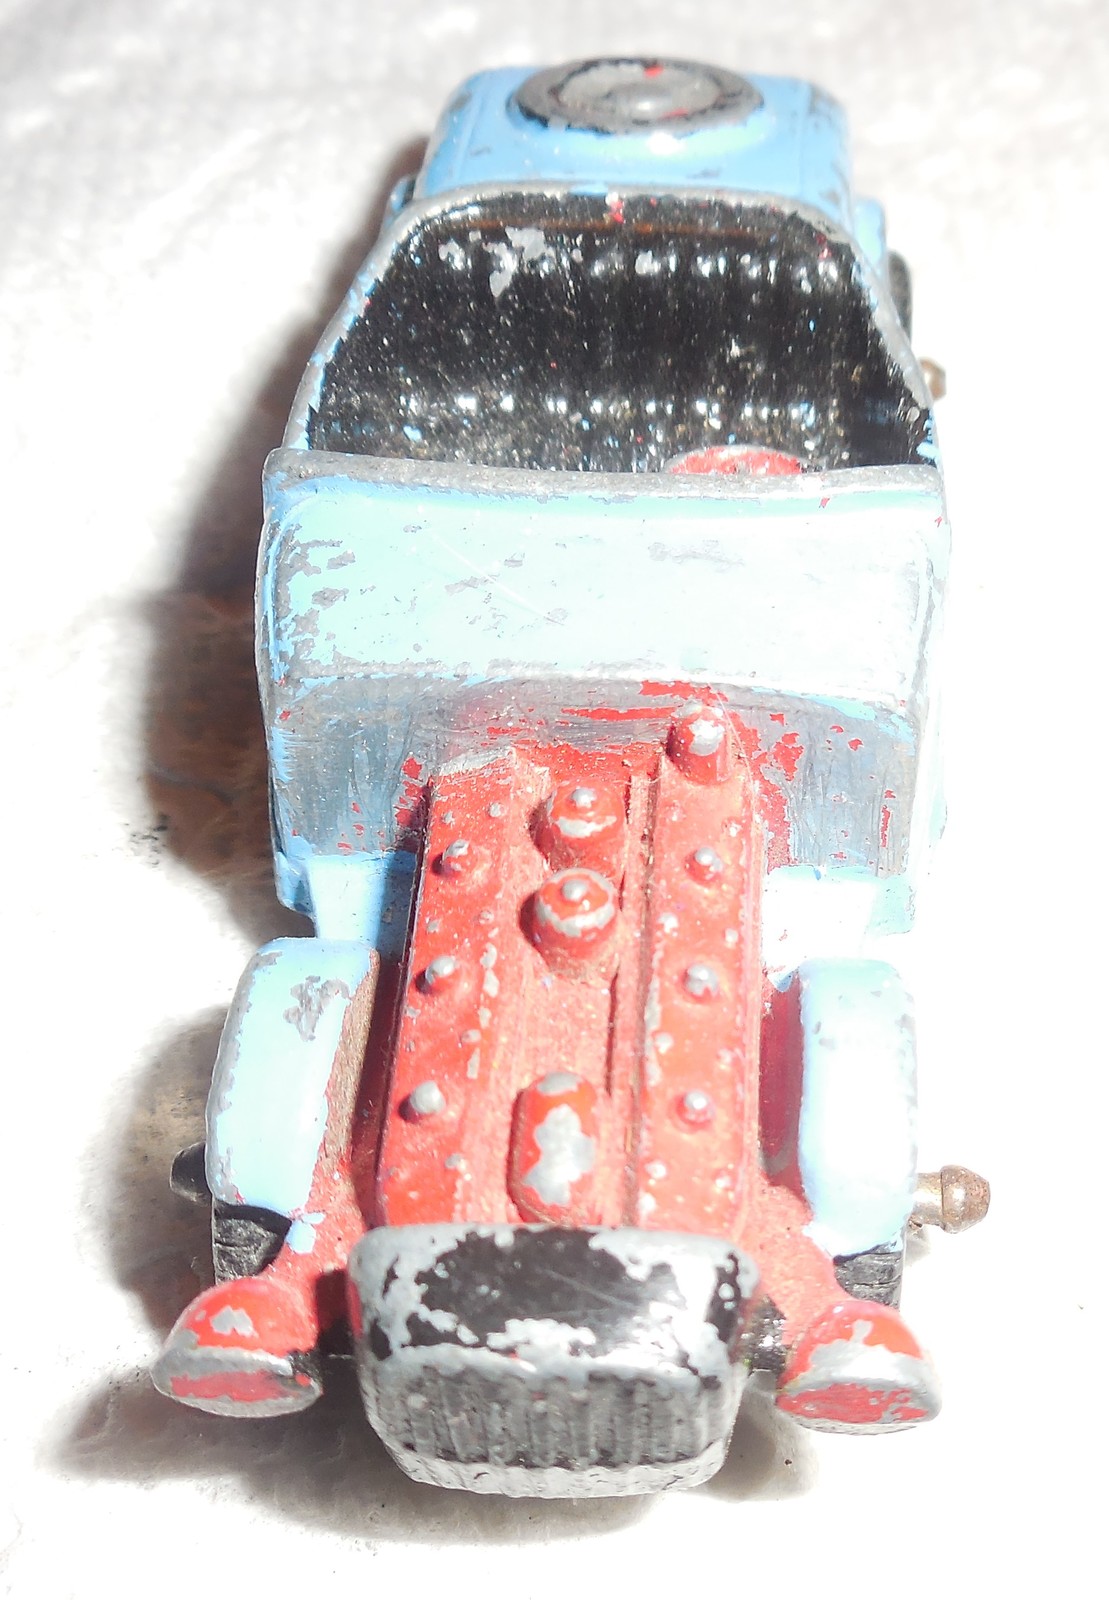 Tootsietoy Made In U.S.A Model 8 Blue,Red & Black Used Jalopy - $7.00